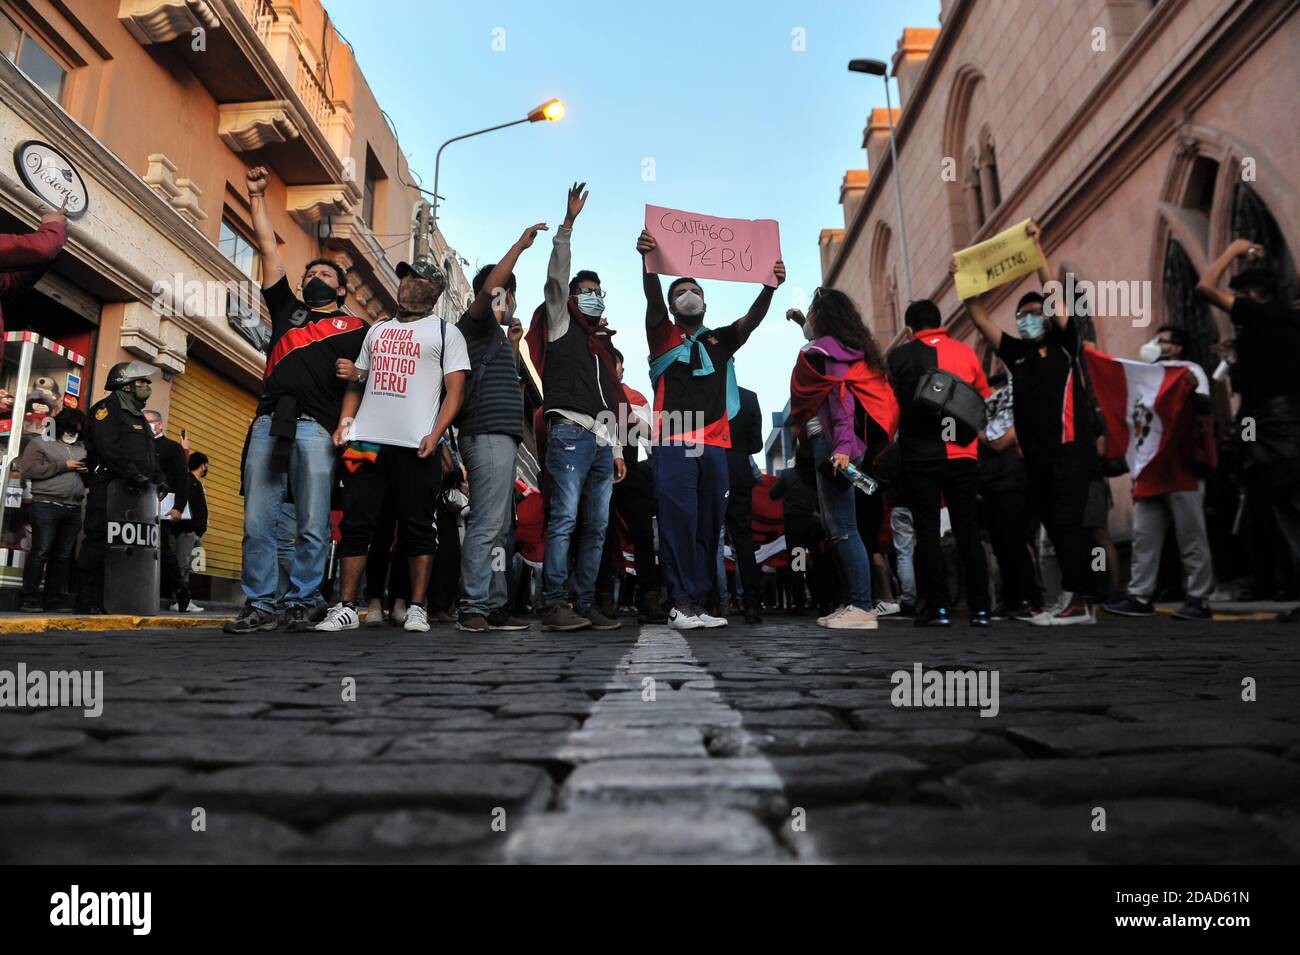 Arequipa, November 11, 2020: Hundreds of protesters in the Plaza de Armas against the appointment of Manuel Merino as president of the Perú Stock Photo